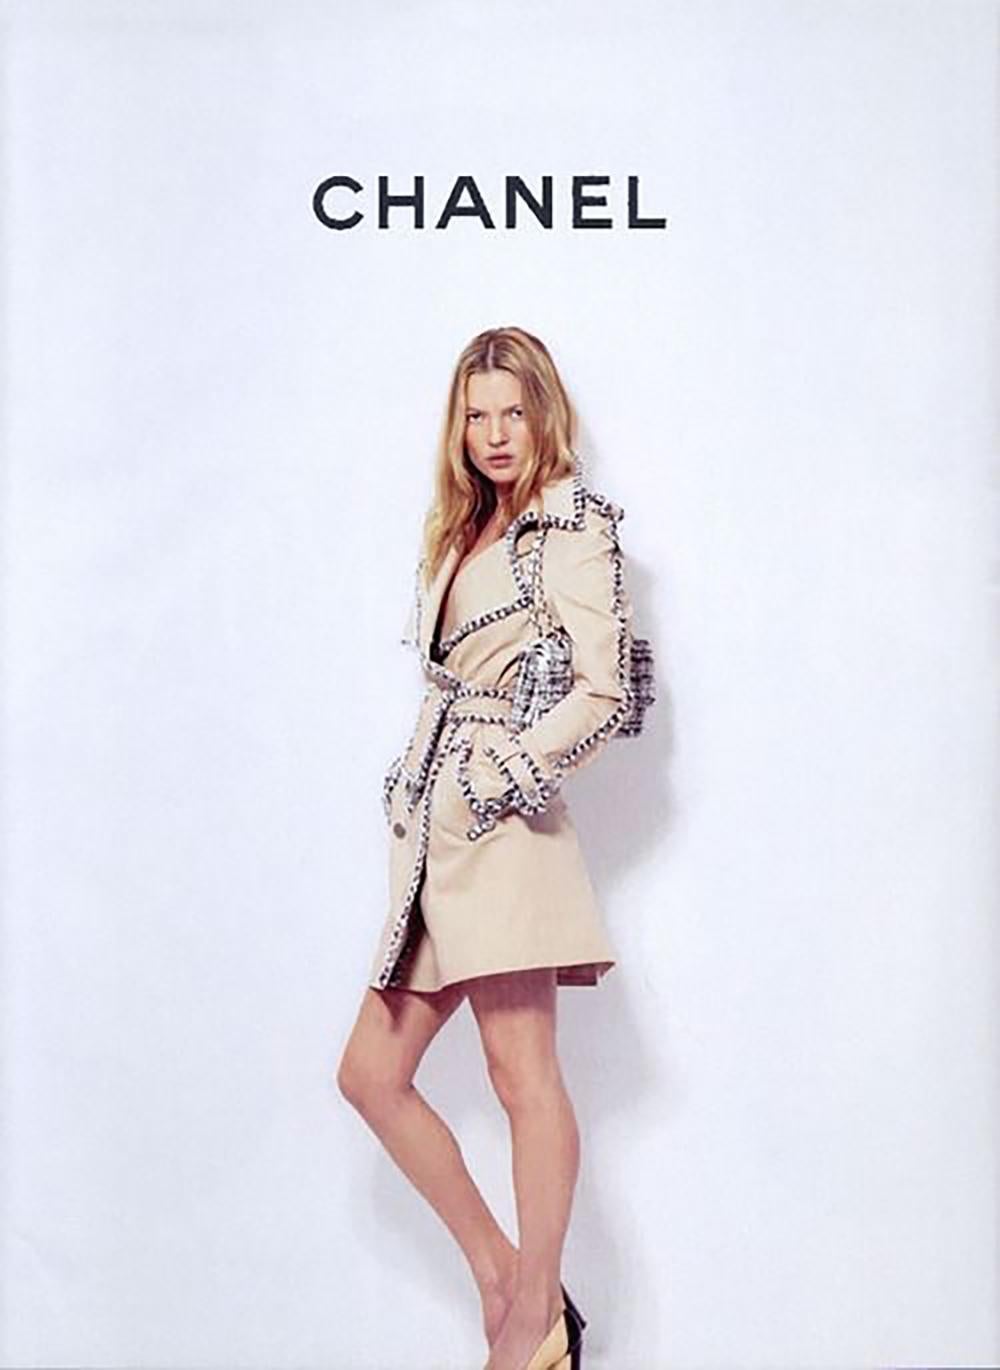 Legendary, extremely rare Chanel beige quilted trench with leather & metal chain trim from Mr Karl Lagerfeld's 2004 Spring collection, 04A, 04P
As seen in Ad Campaign on Kate Moss! 
Iconic and recognisable -- unmistakably Chanel style.
Size mark 40